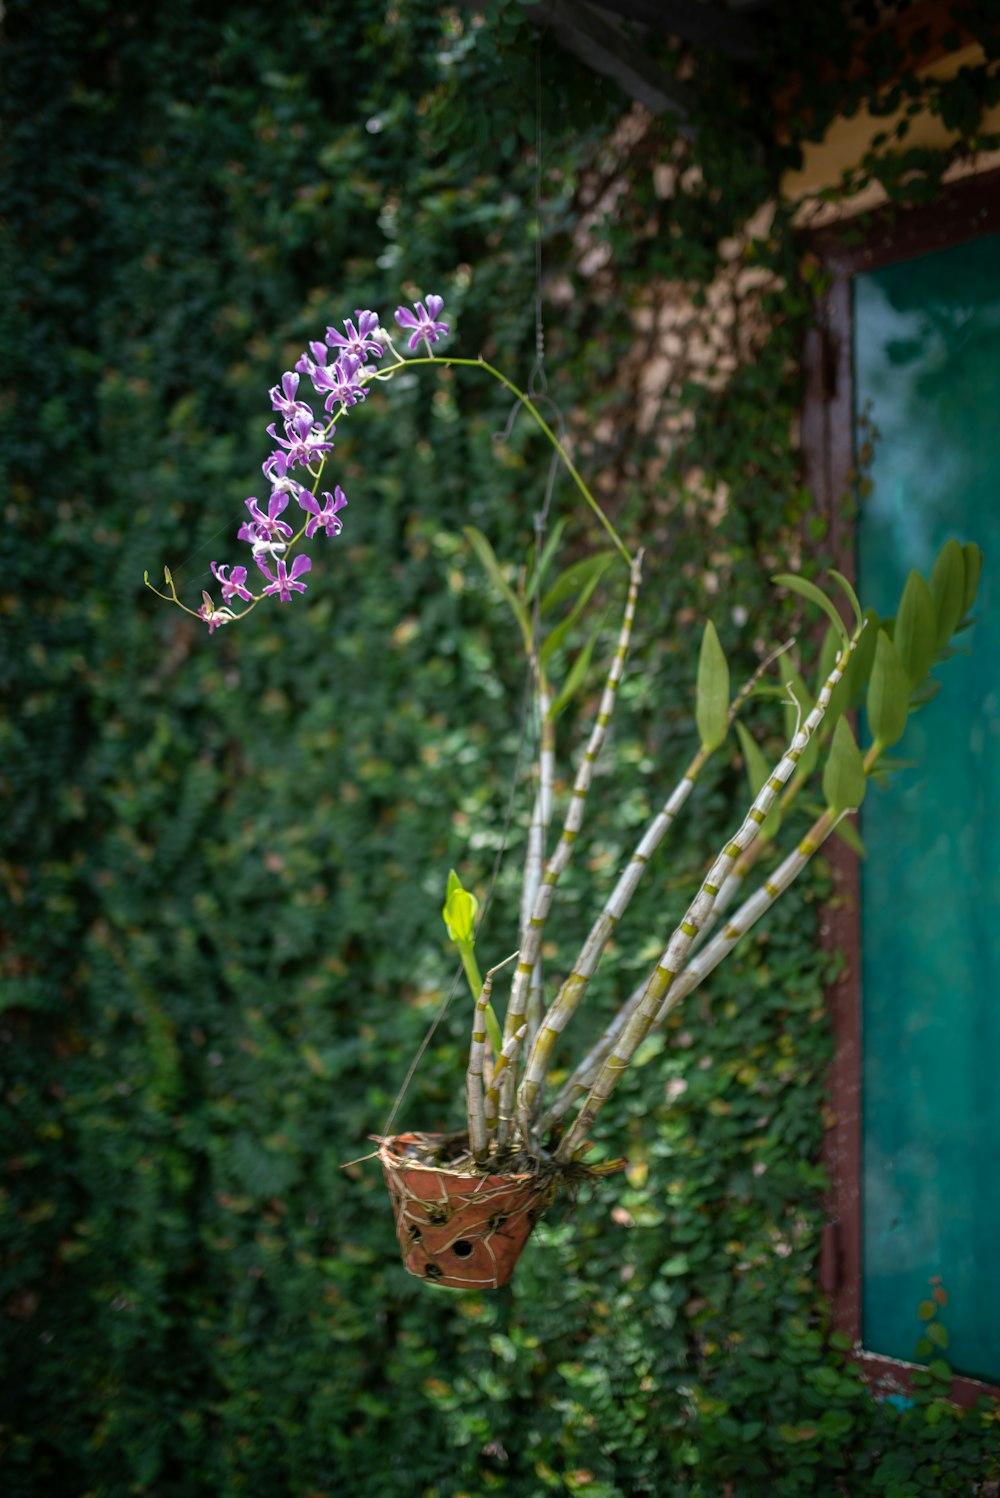 a potted plant with purple flowers hanging from it